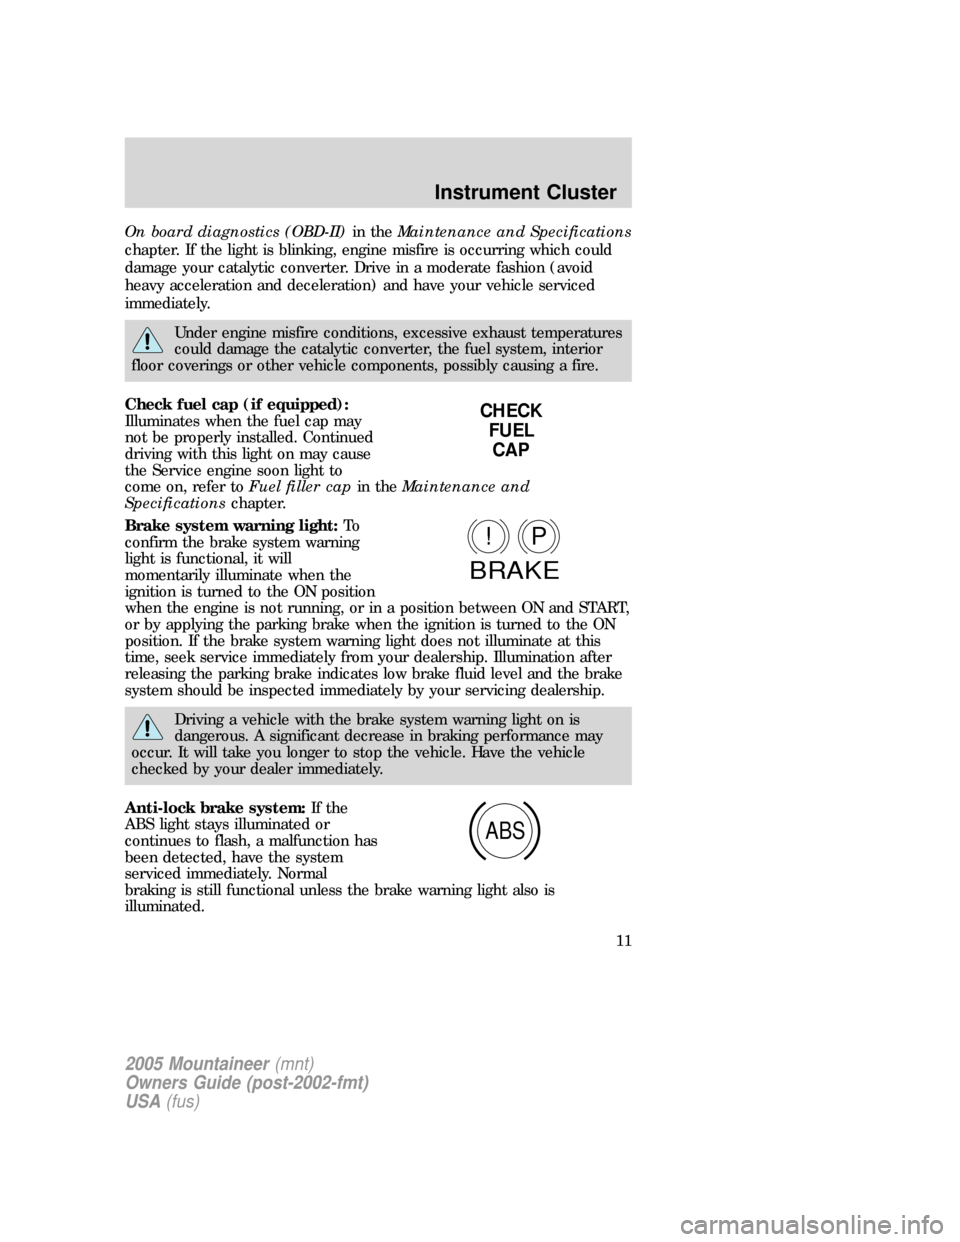 Mercury Mountaineer 2005  Owners Manuals On board diagnostics (OBD-II)in theMaintenance and Specifications
chapter. If the light is blinking, engine misfire is occurring which could
damage your catalytic converter. Drive in a moderate fashio